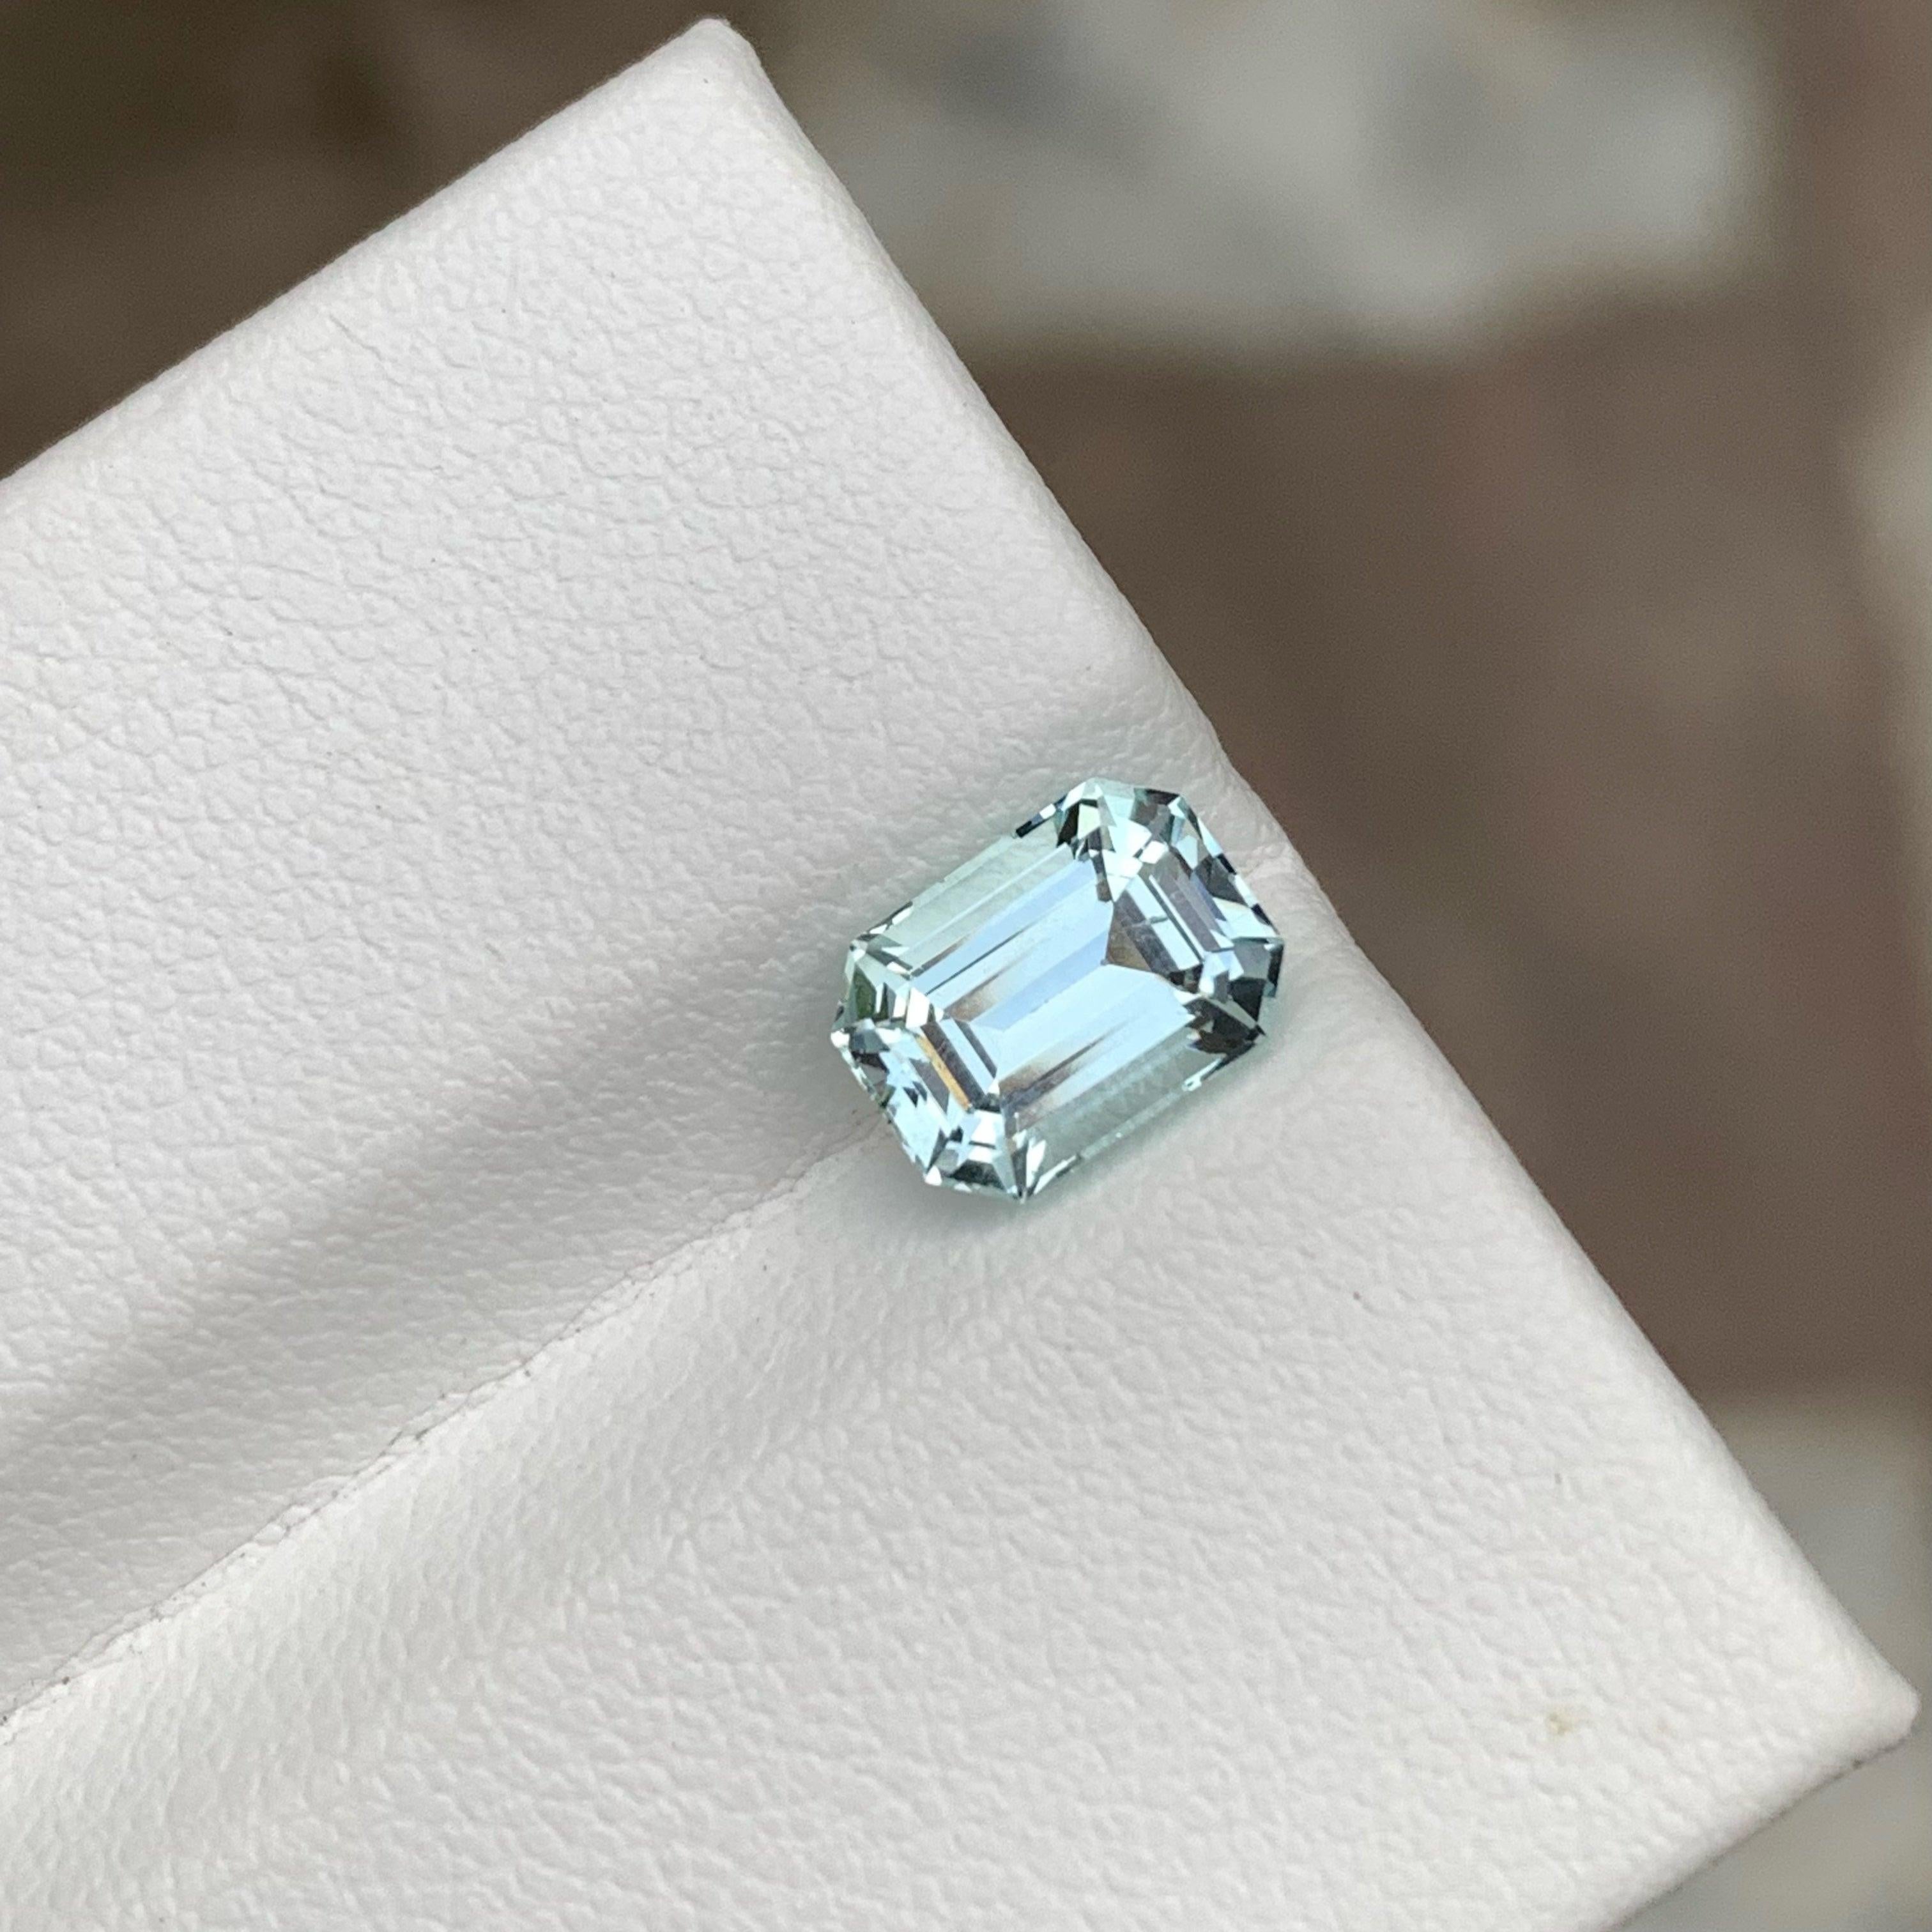 Natural Aquamarine stone, available for sale at wholesale price natural high quality 1.95 Carats VVS Clarity Loose Aquamarine from Pakistan.

Product Information:
GEMSTONE NAME: Exquisite Natural Loose Aquamarine Gem
WEIGHT:	1.95 Carats
DIMENSIONS:	